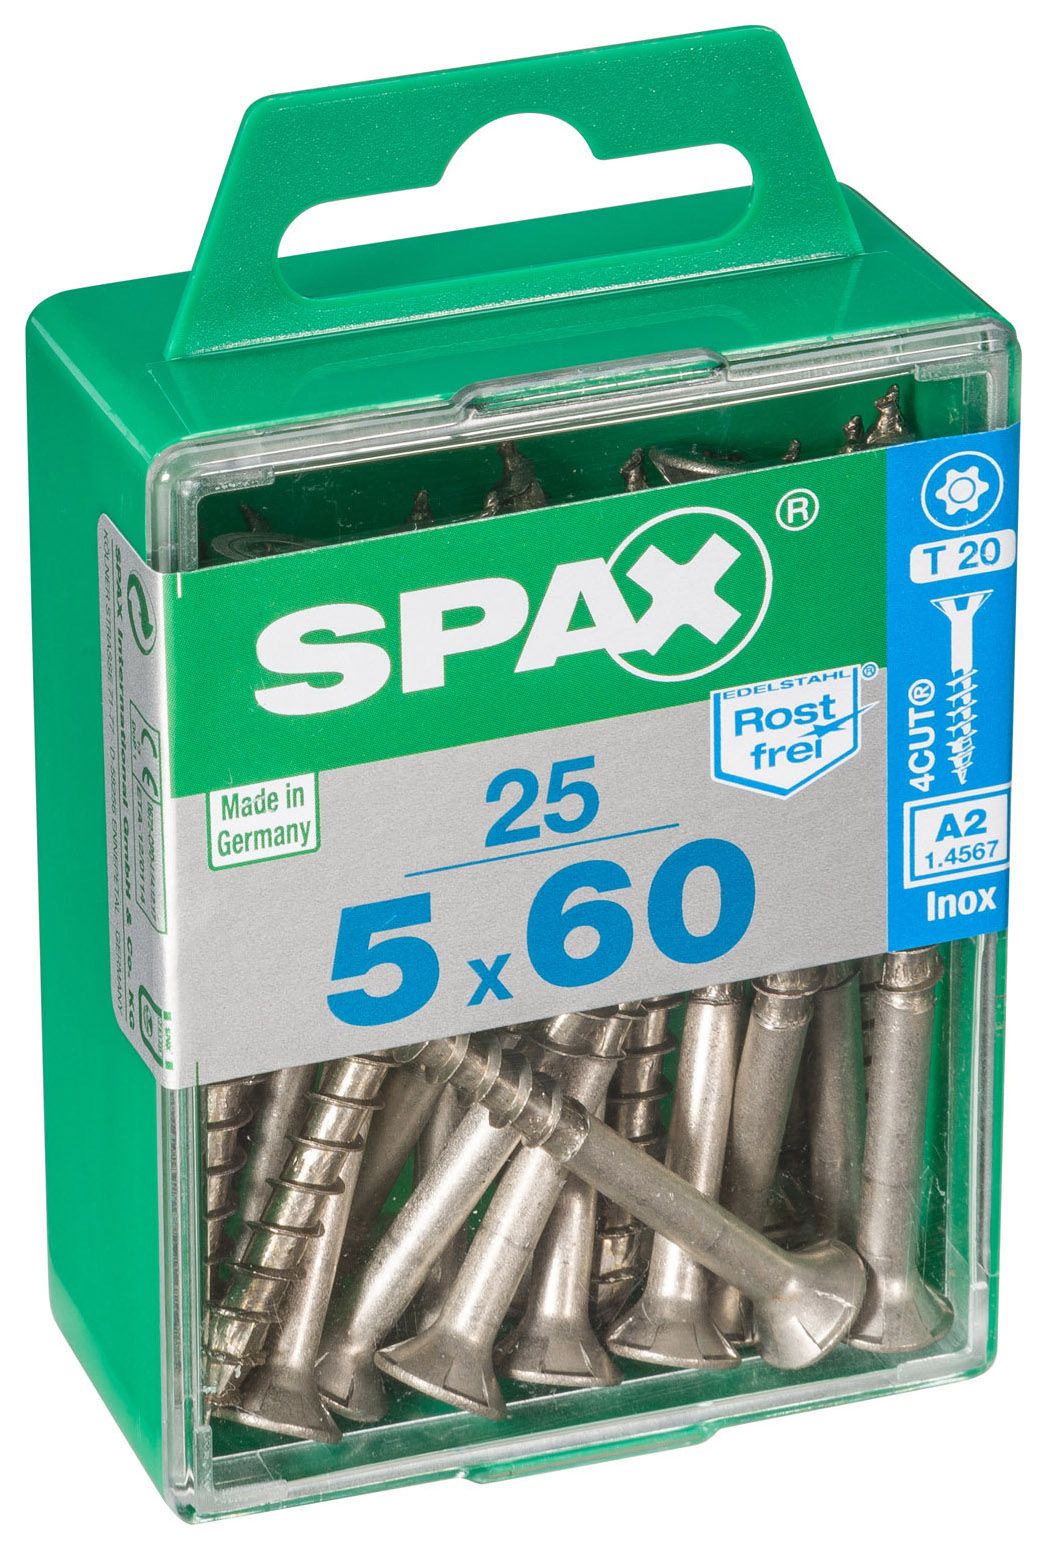 Image of Spax TX Countersunk Stainless Steel Screws - 5 x 60mm Pack of 25